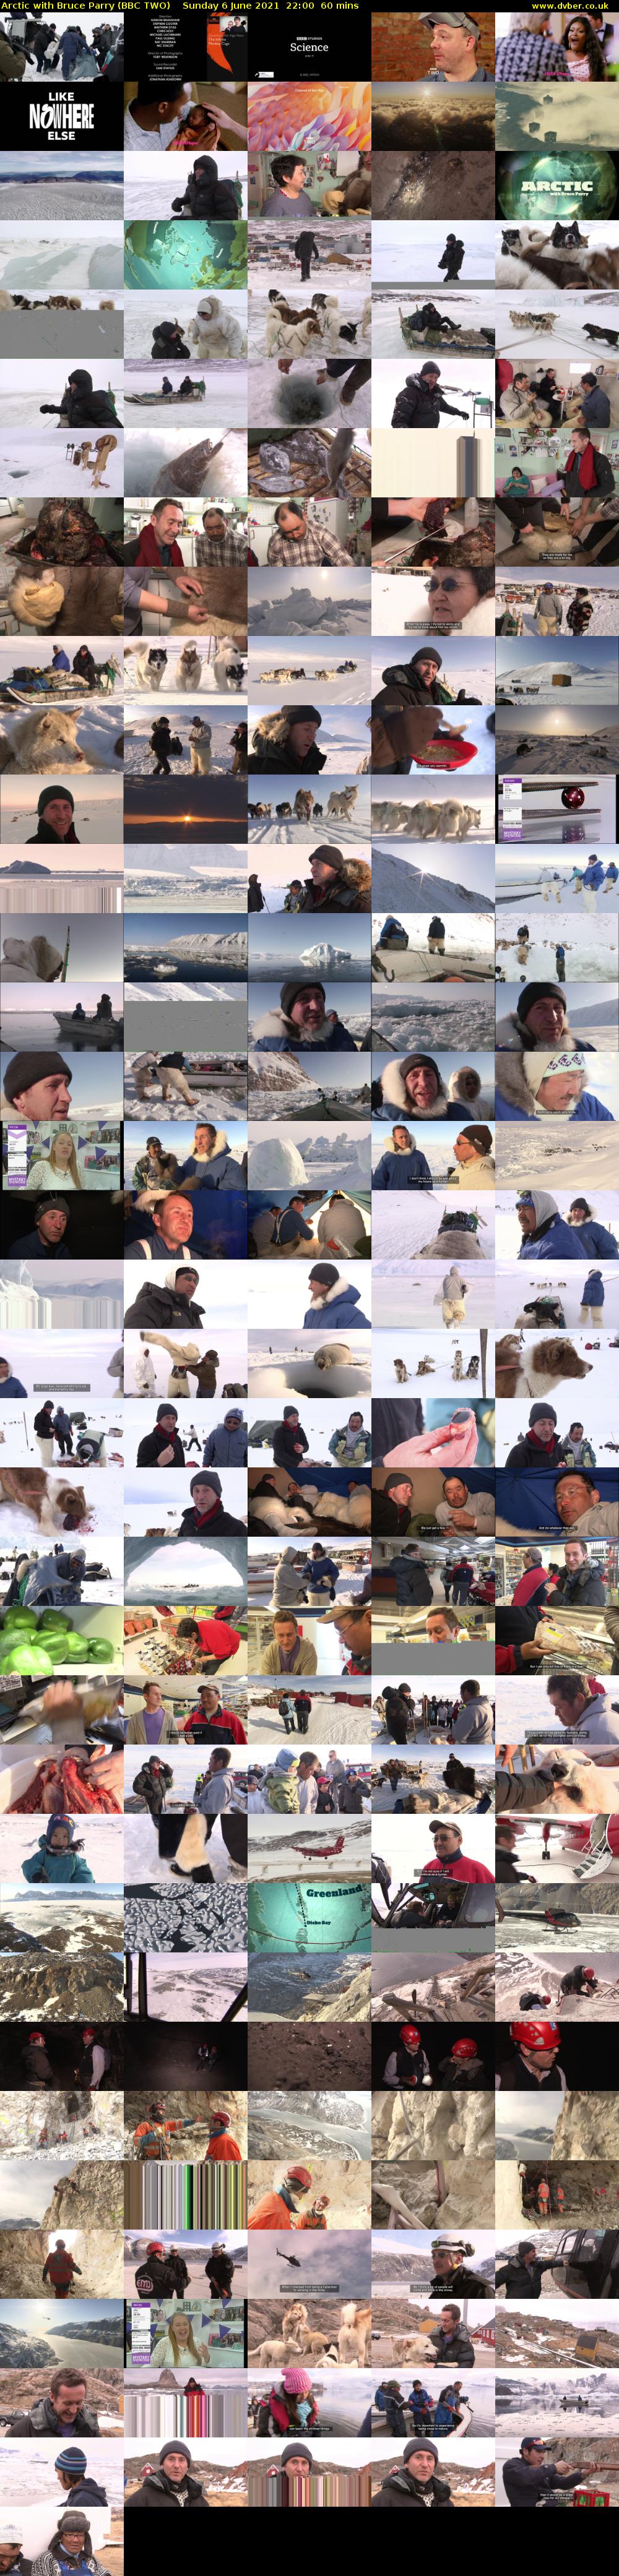 Arctic with Bruce Parry (BBC TWO) Sunday 6 June 2021 22:00 - 23:00